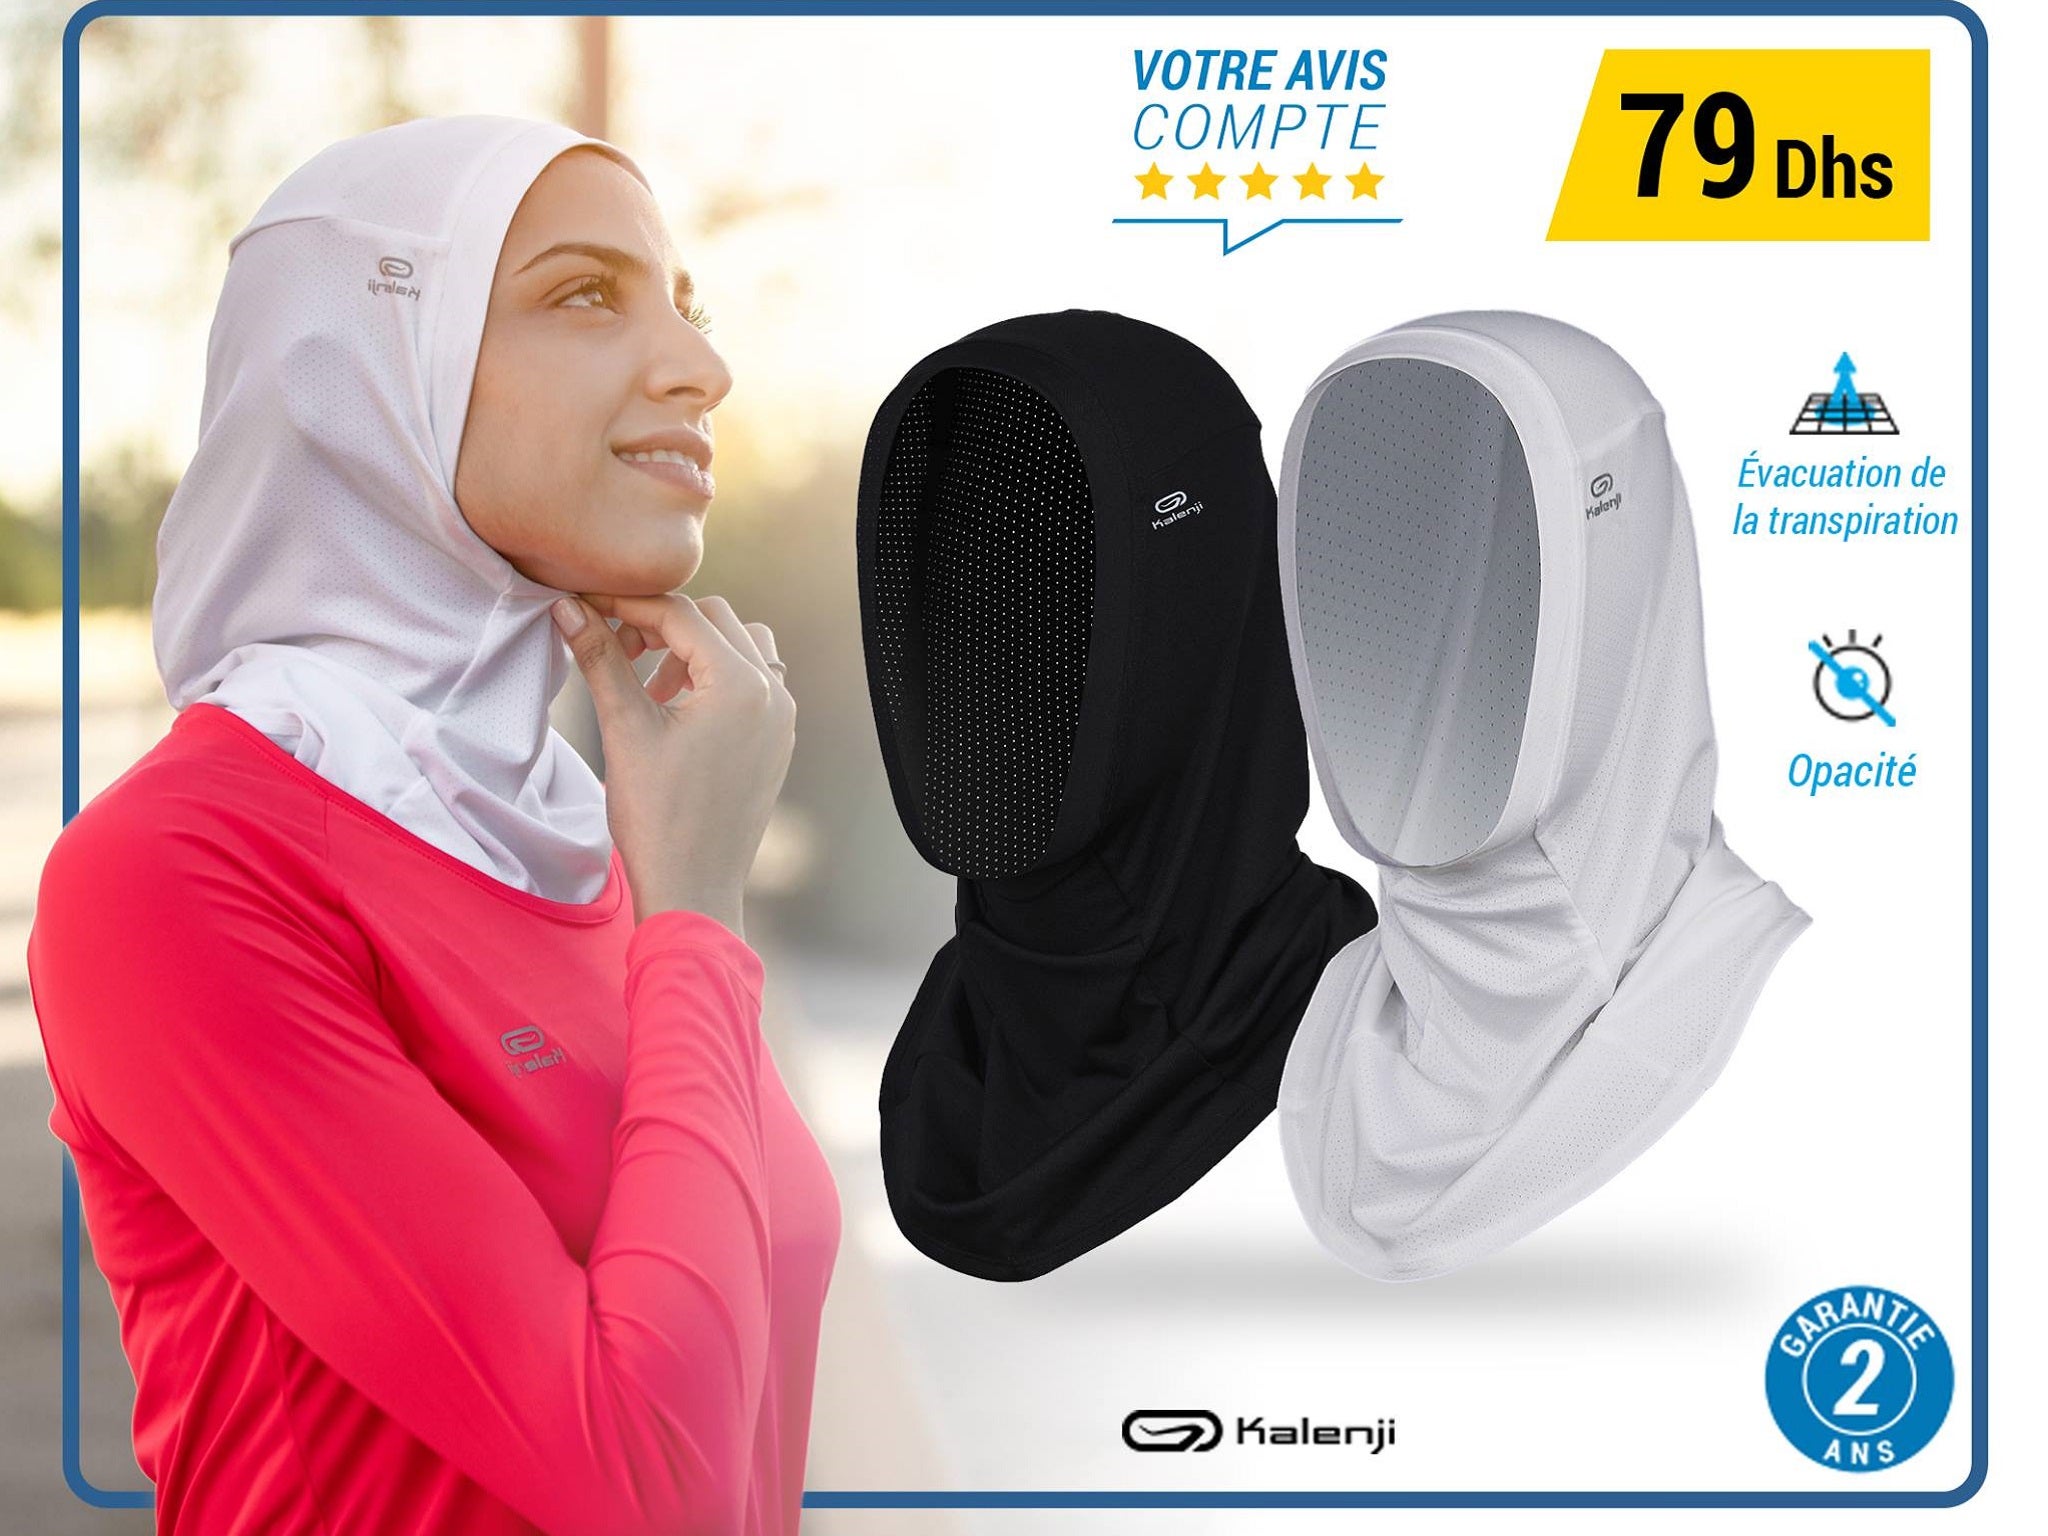 Sports retail brand Decathlon has cancelled plans to sell a 'running' hijab in its stores in France after a public backlash. The head covering is already on sale in Morocco and was due to be rolled out to other countries in March 2019.